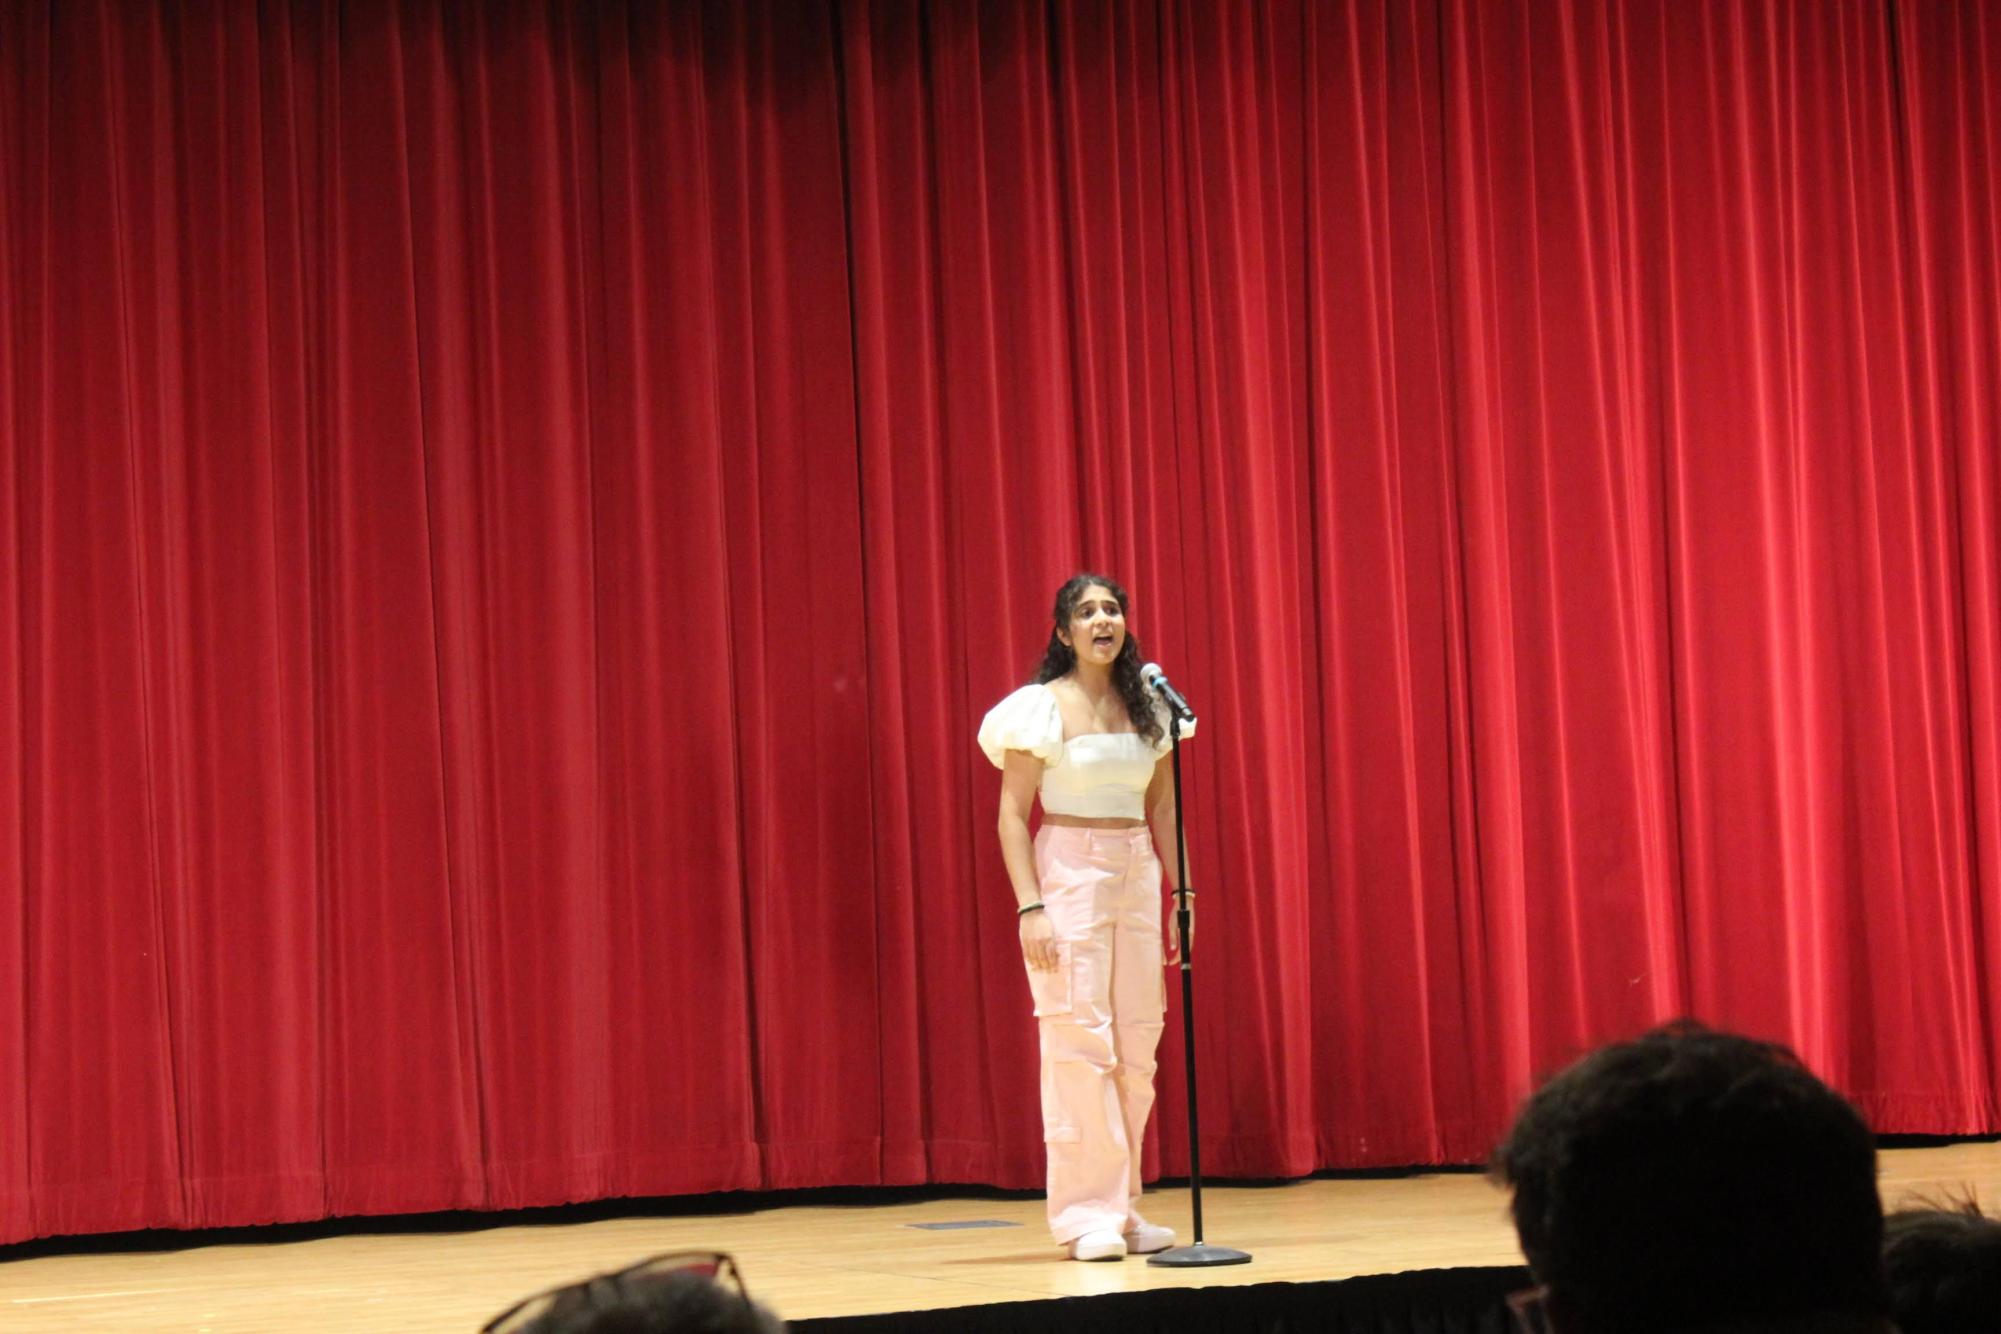 Performing Arts Club president Abby Sebastian performing at the Valentines Cabaret